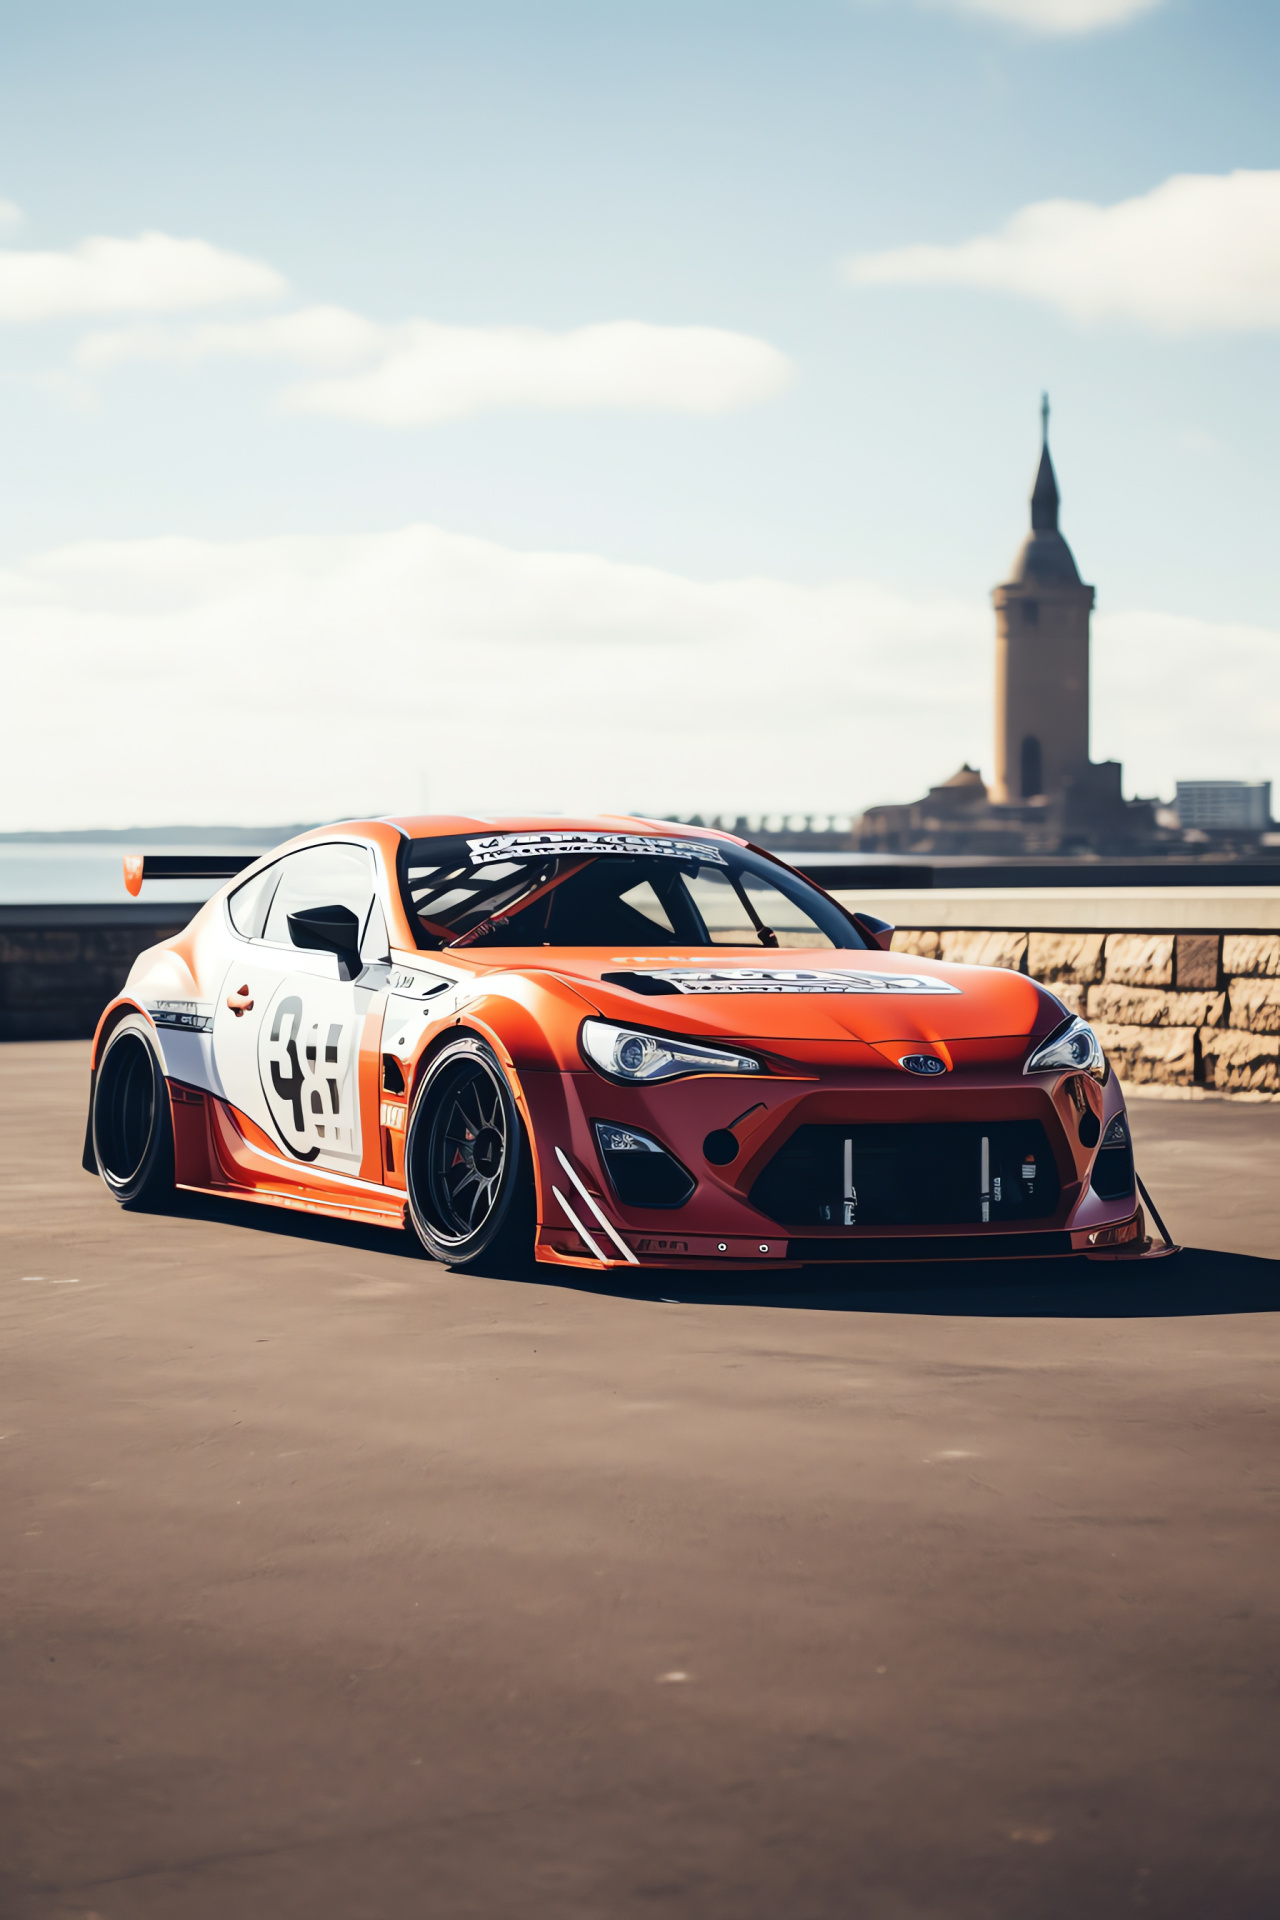 Rocket Bunny Toyota 86, Modified cars, Sydney street racing, Drift car culture, Japanese coupe, HD Phone Image